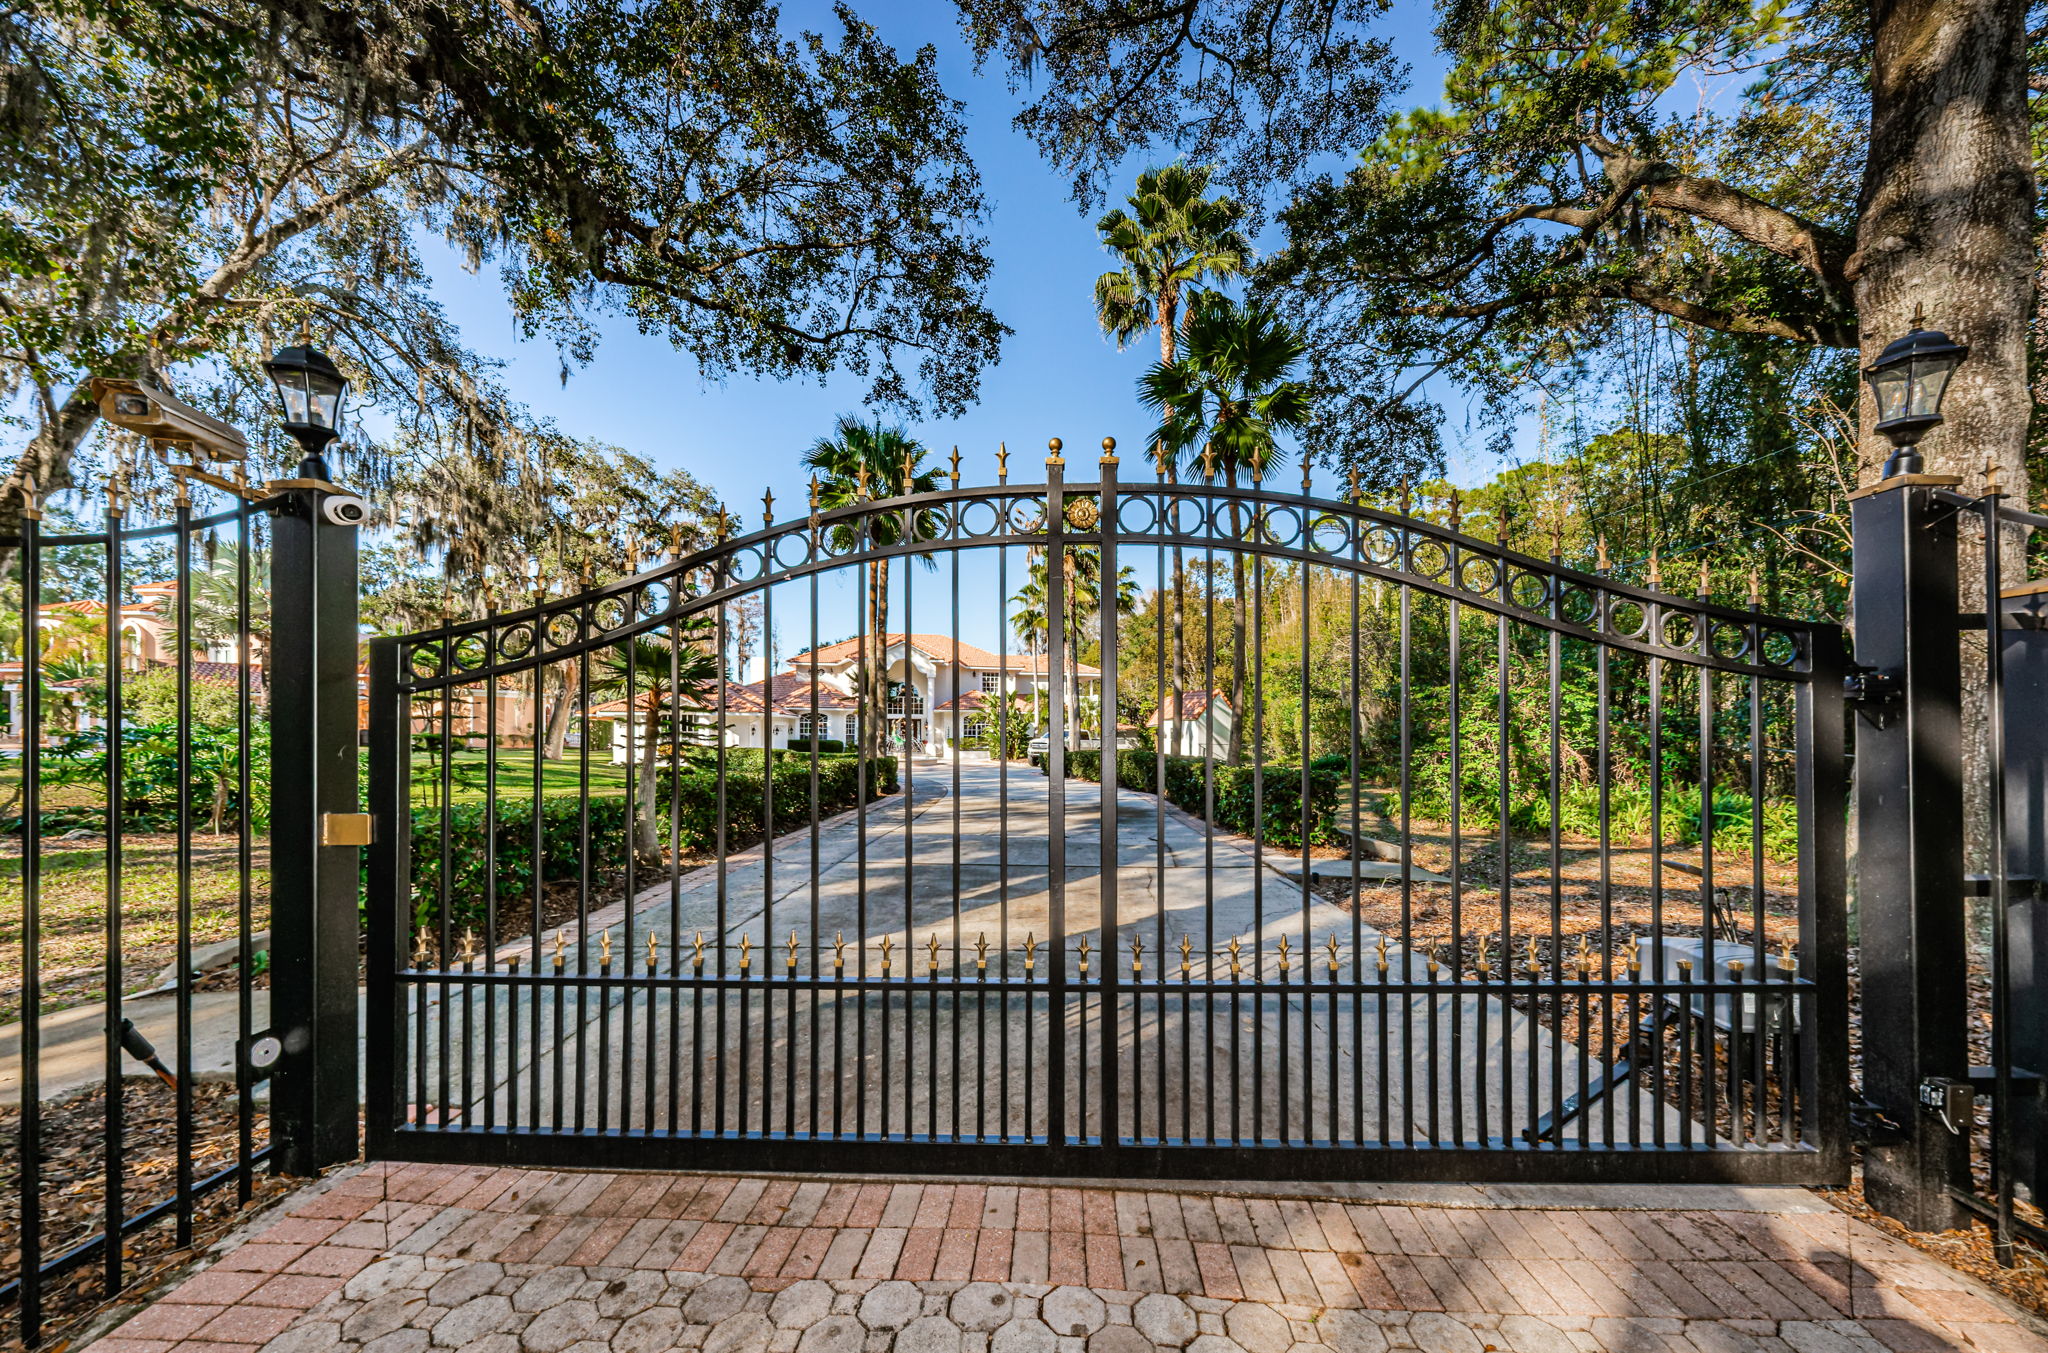 Gated Entry2